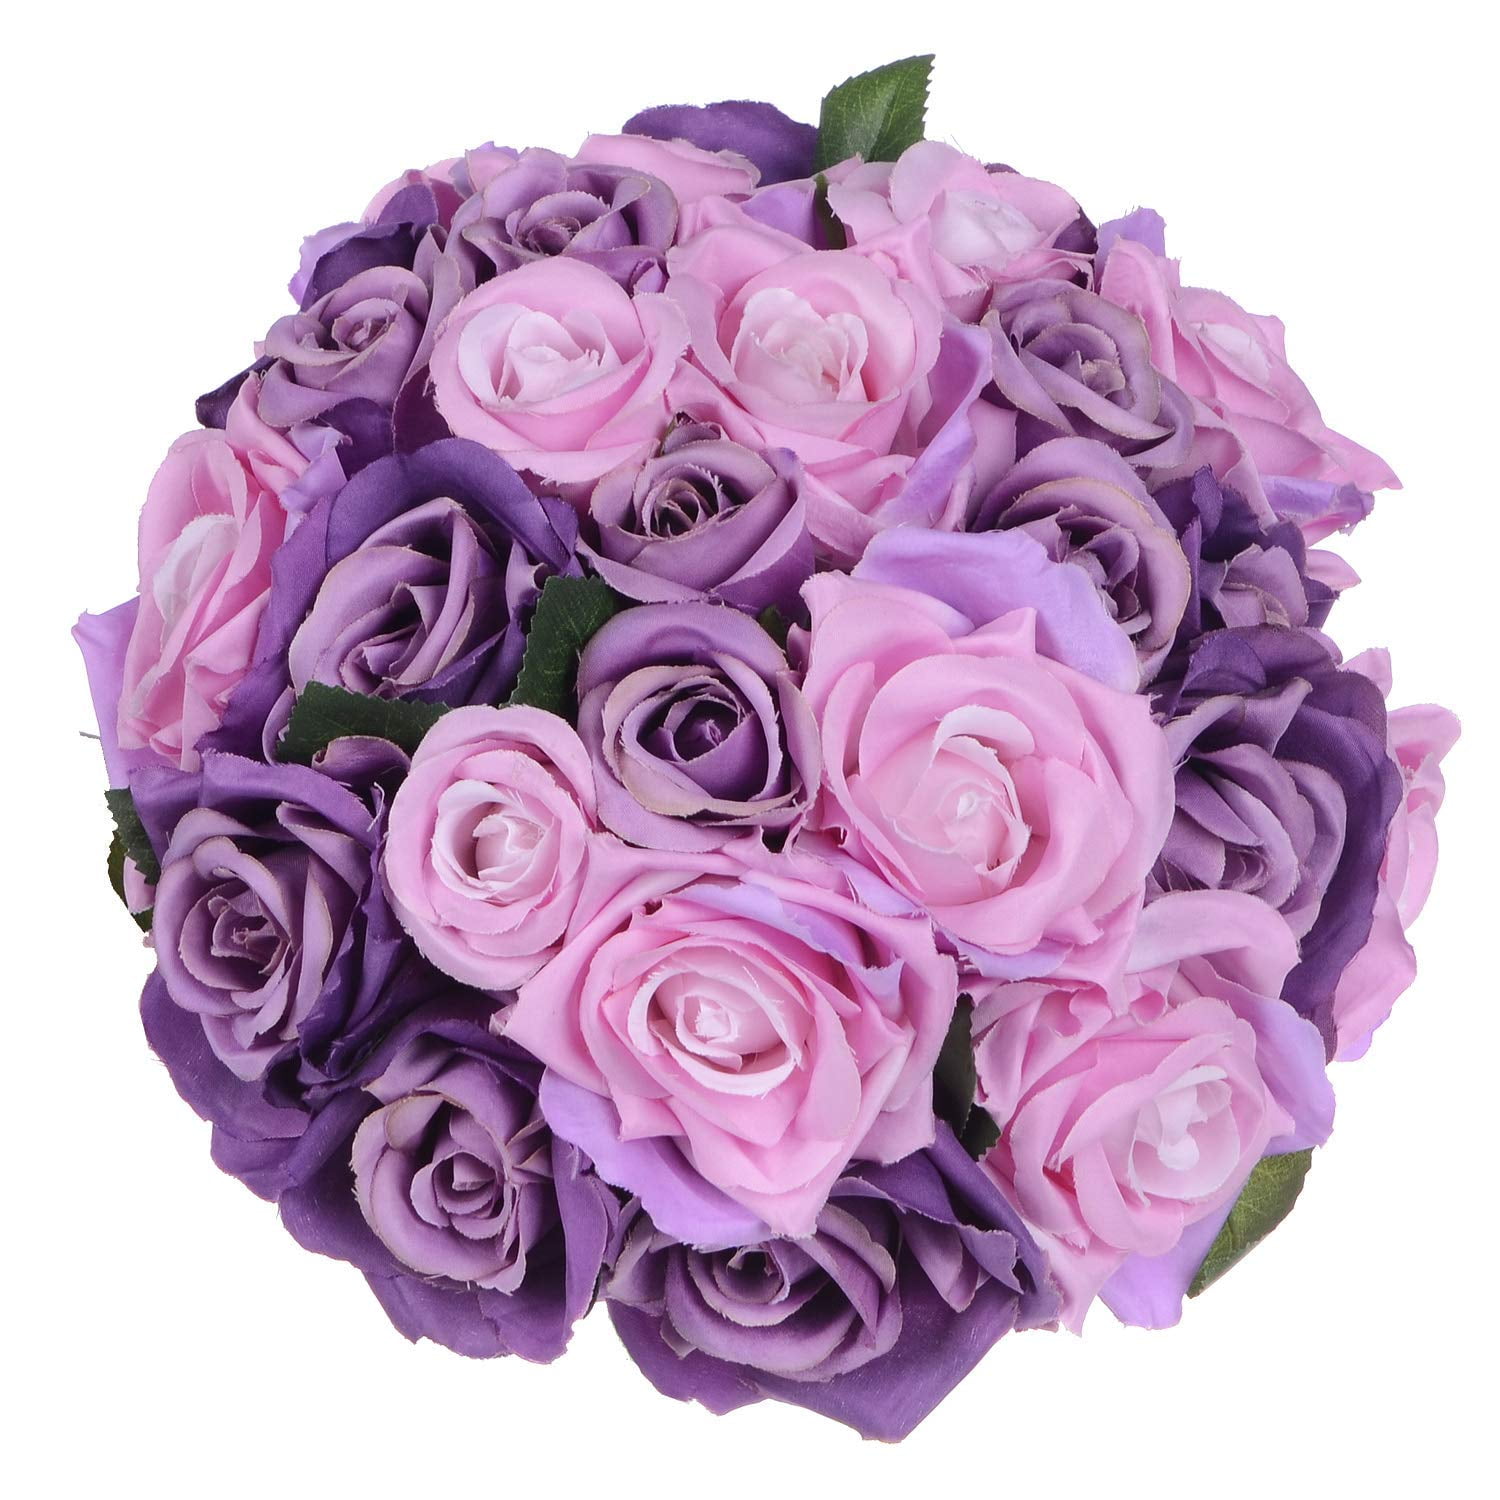 Artificial Flowers Rose Bouquet 2 Pack Fake Flowers Silk Plastic Artificial  White Roses 18 Heads Bridal Wedding Bouquet for Home Garden Party Wedding  Decoration (Purple-Pink) 